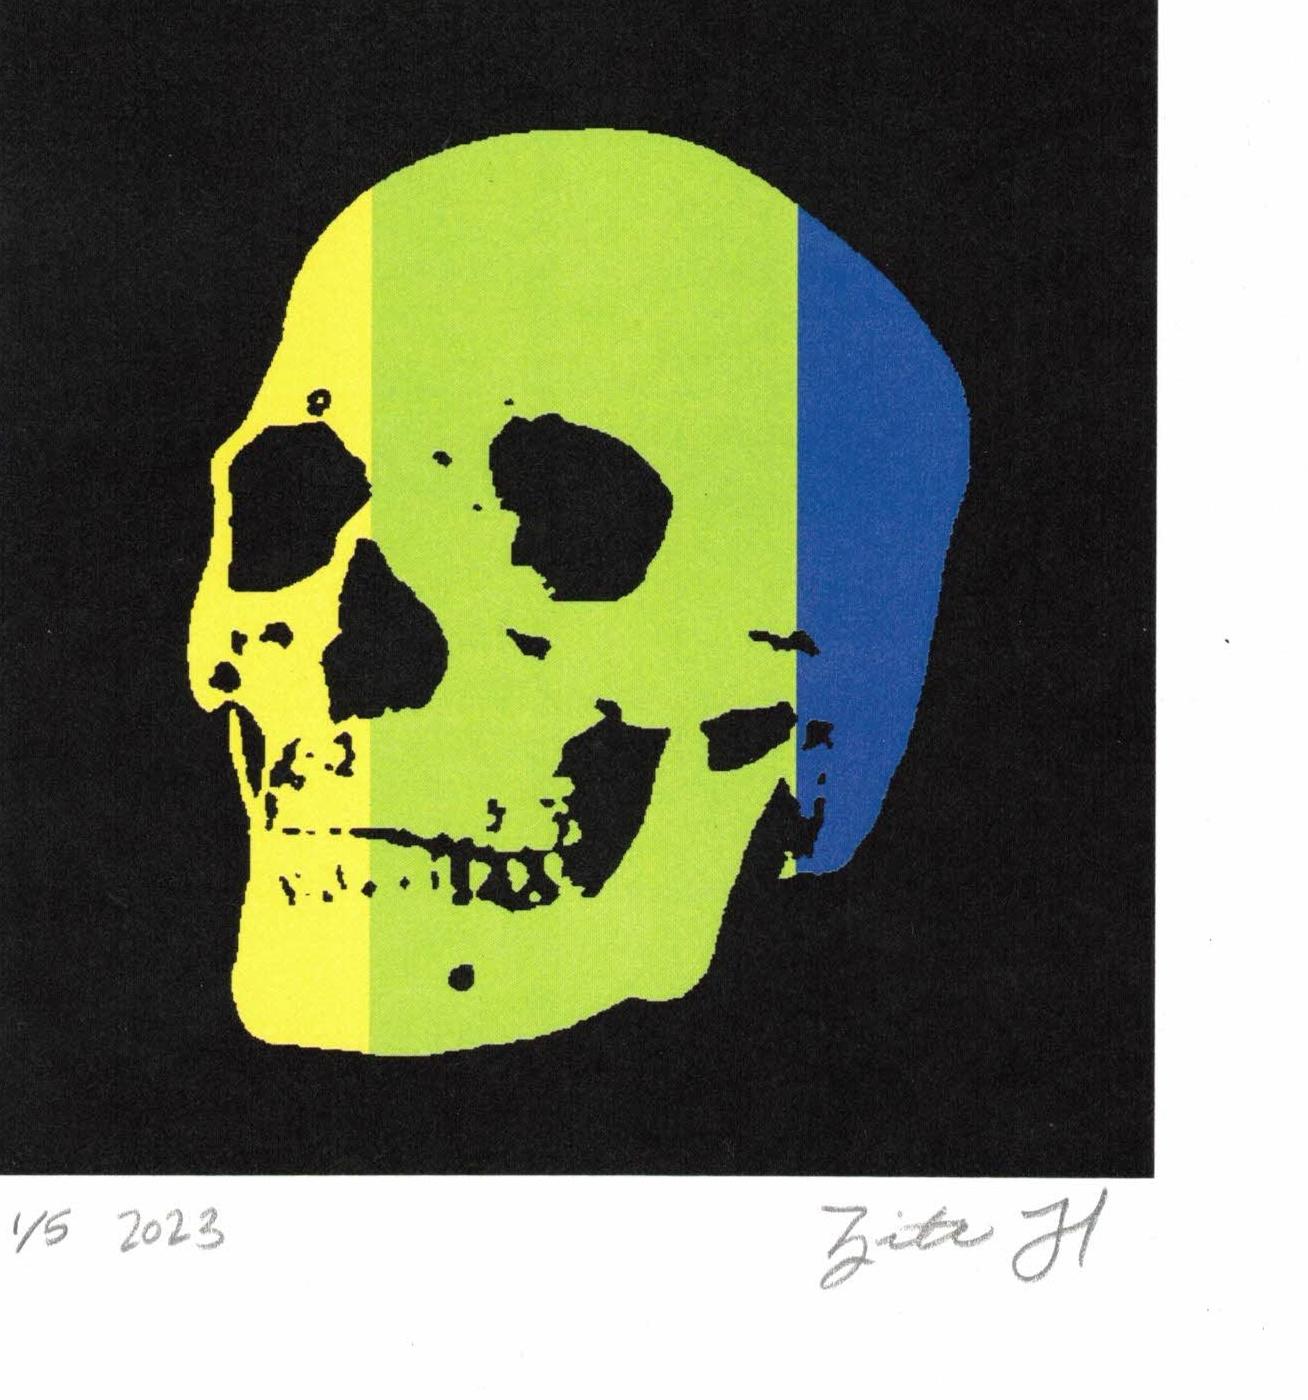 Zita Hastings, American, b.1996

Rainbow Skull #248, Print Year: 2023, Printed on 11x8.5 inch card stock, image size is approx 3.8x3.8 inches. Hand Signed in Pencil.

Artist Biography:
Zita Hastings is an American artist of Native American, Mexican